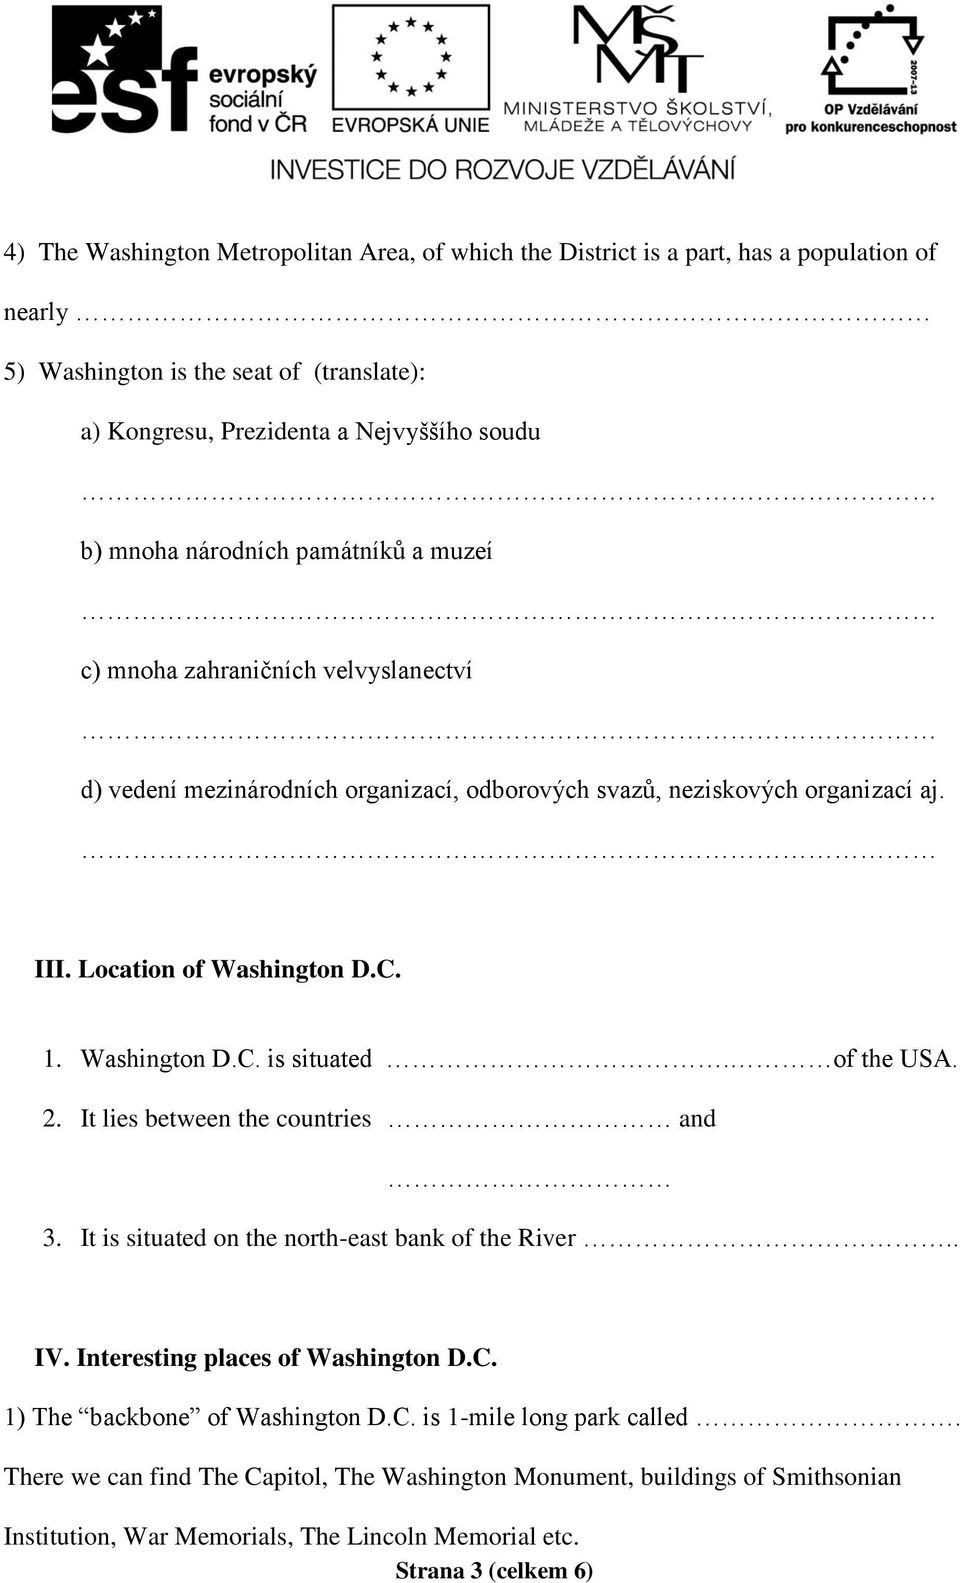 Washington D.C. is situated. of the USA. 2. It lies between the countries and 3. It is situated on the north-east bank of the River.. IV. Interesting places of Washington D.C. 1) The backbone of Washington D.